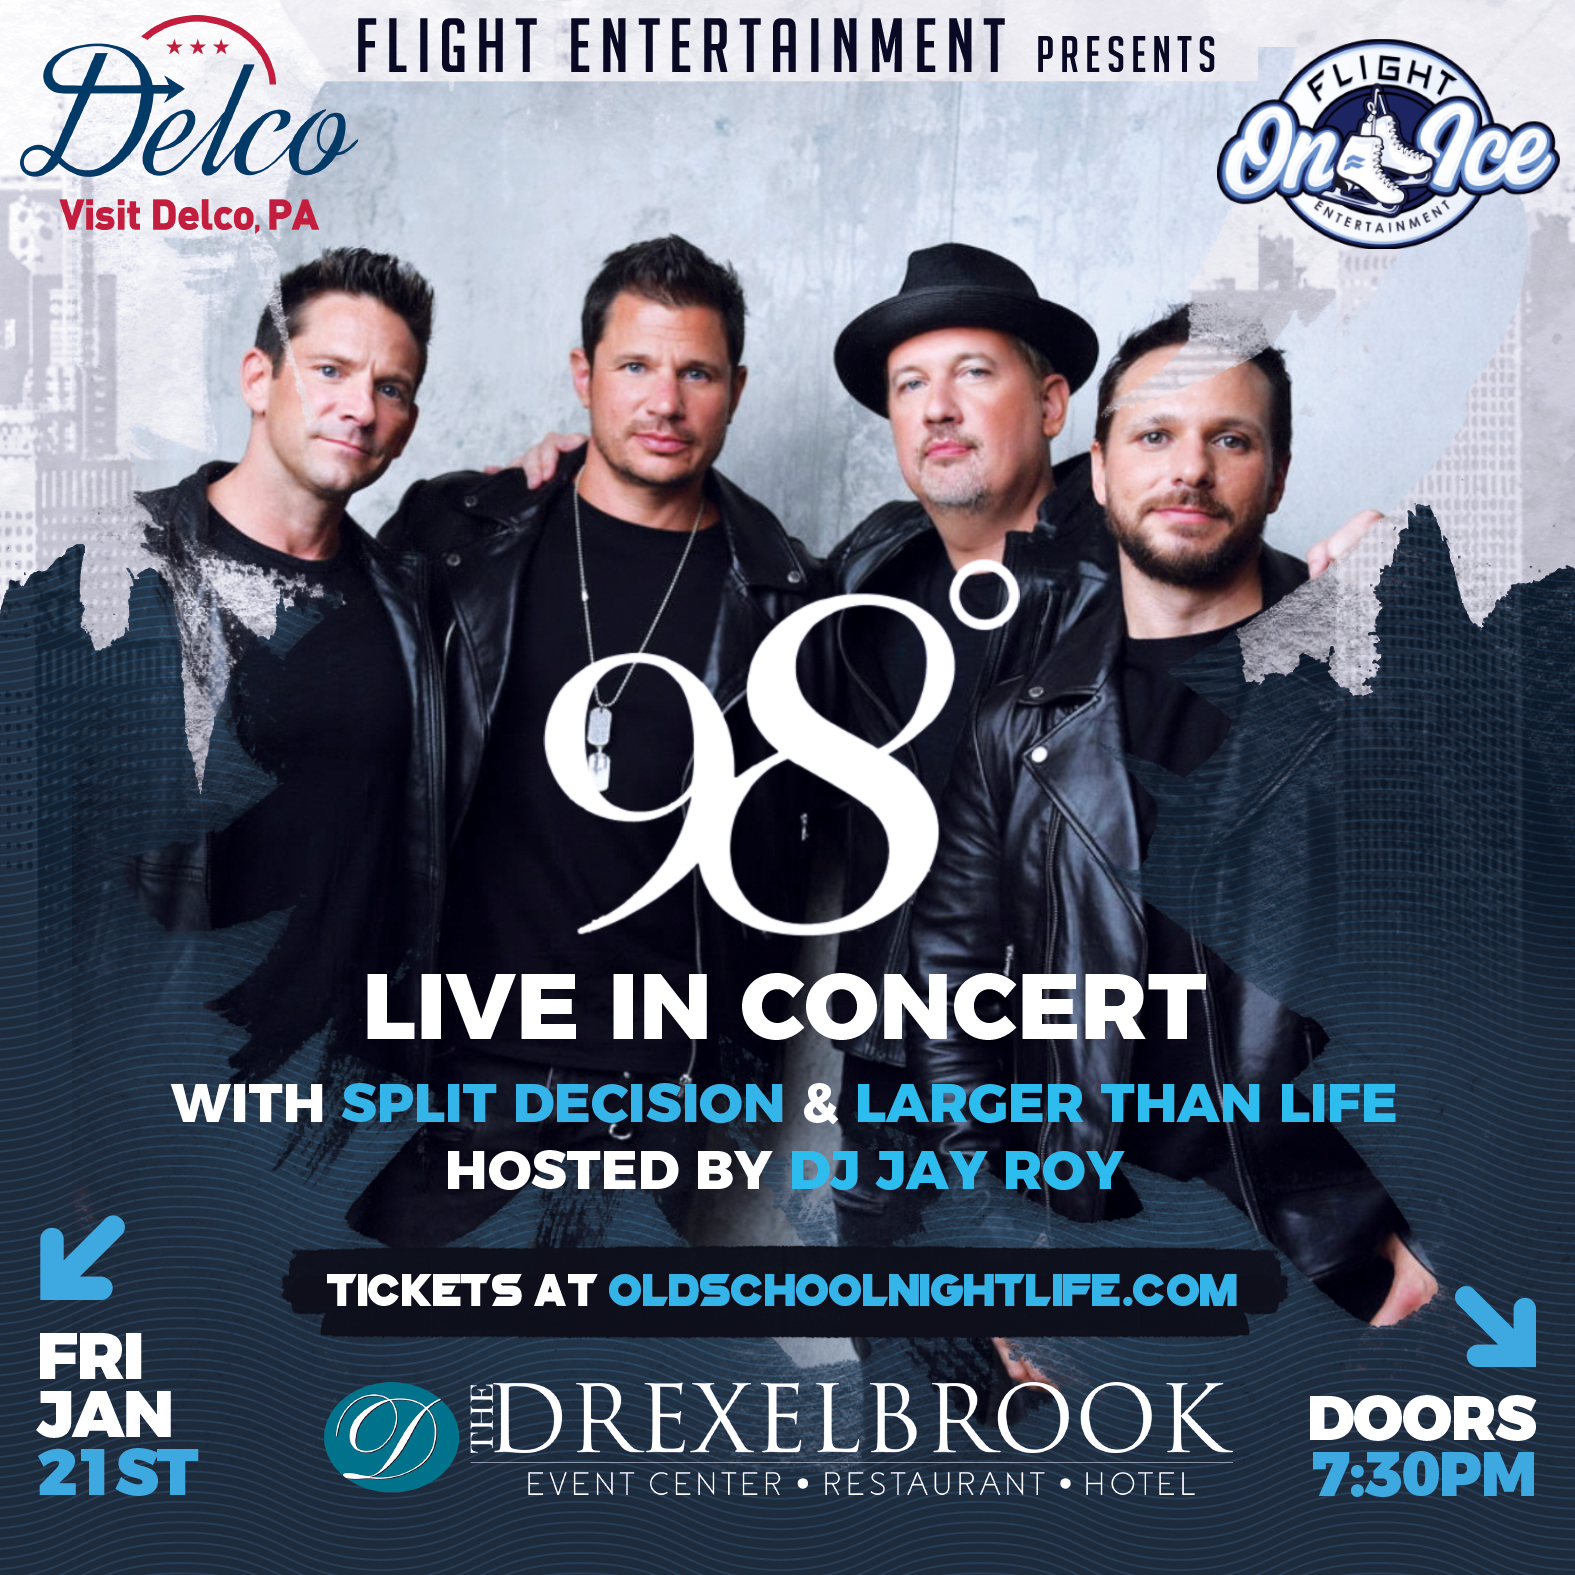 98 Degrees News, Pictures, and Videos - E! Online - CA